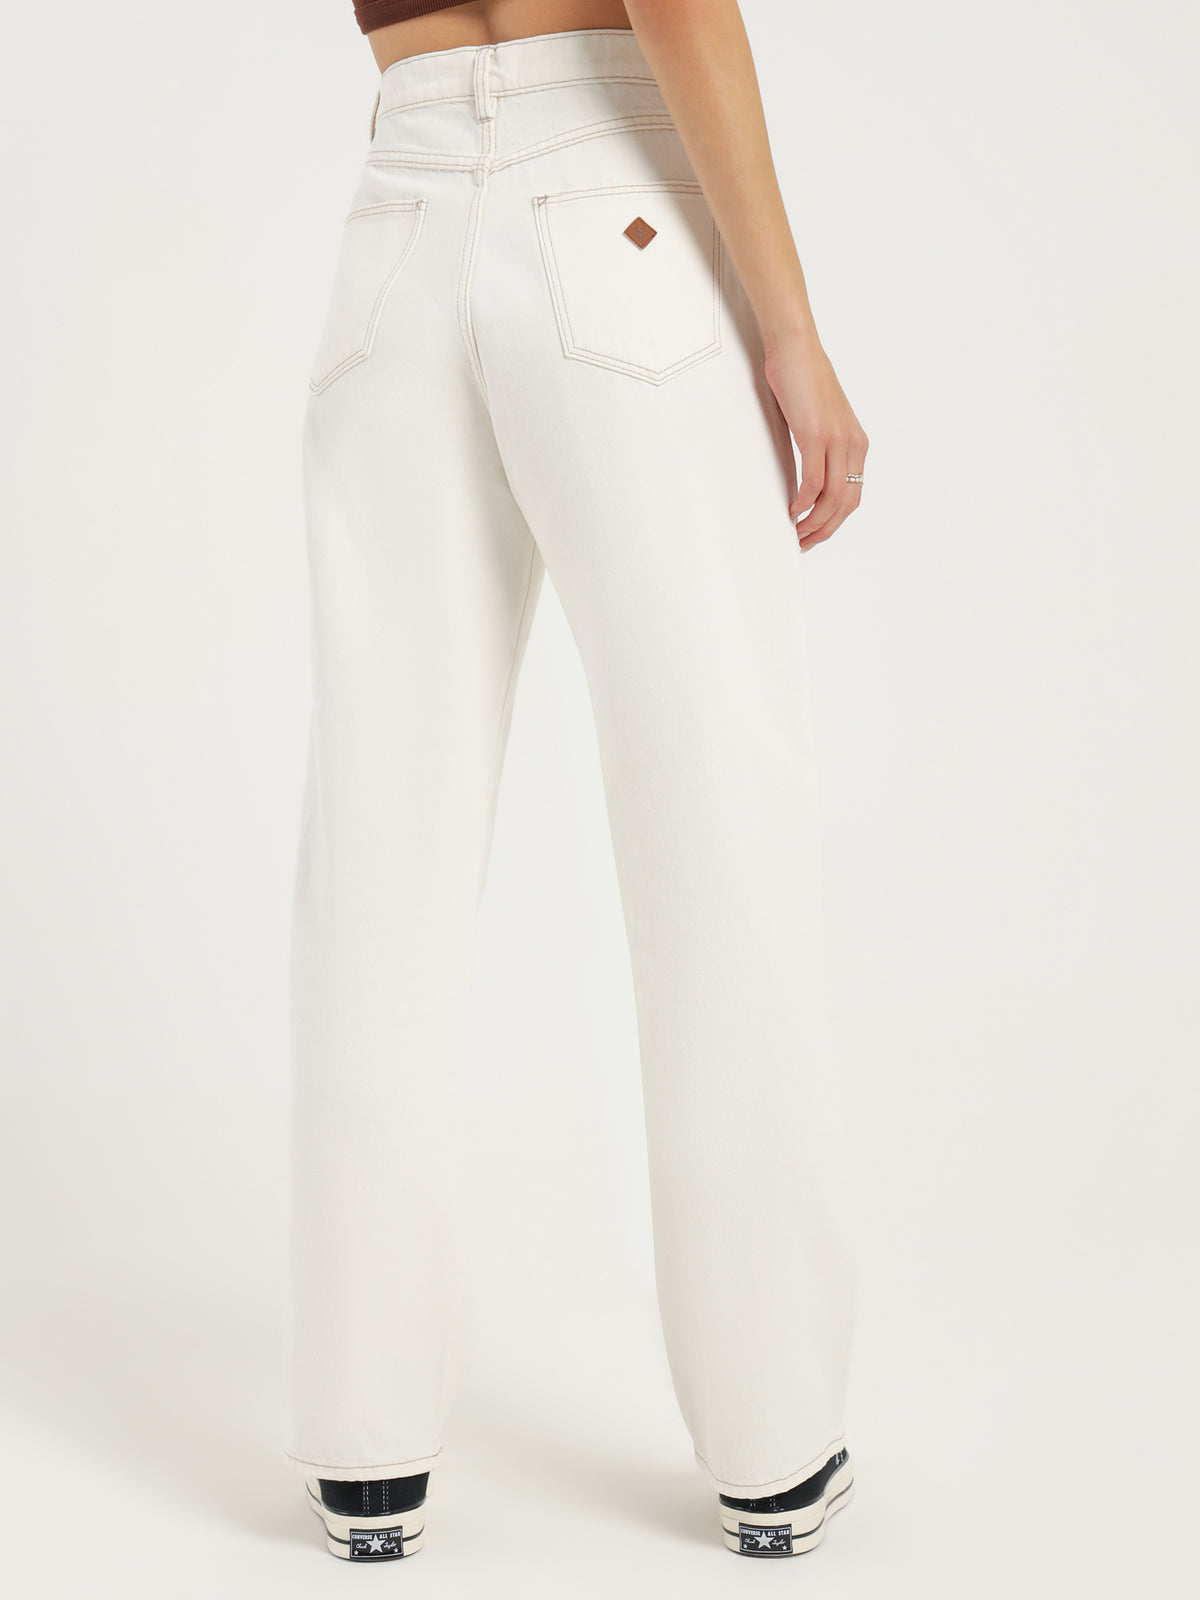 A Slouch Jeans in Vintage White